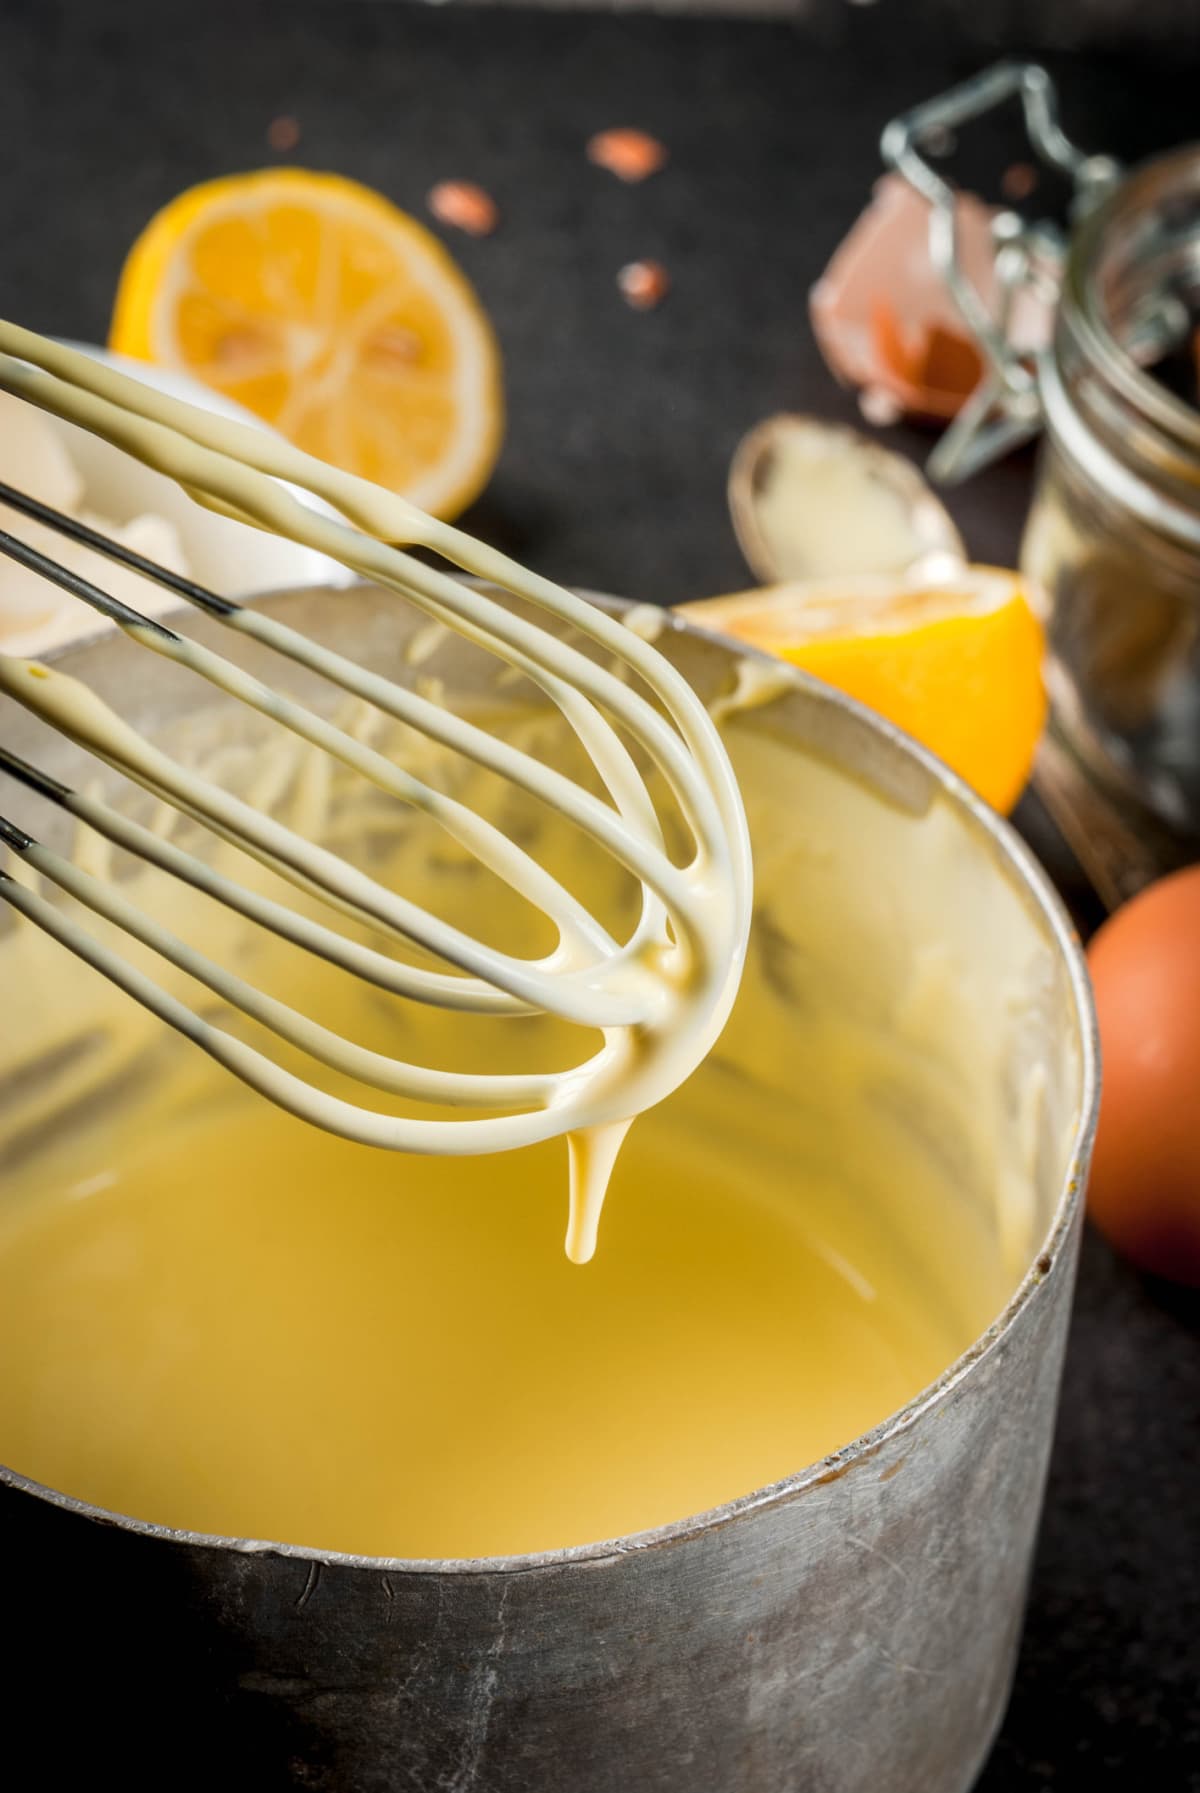 A bowl of hollandaise sauce and a whisk